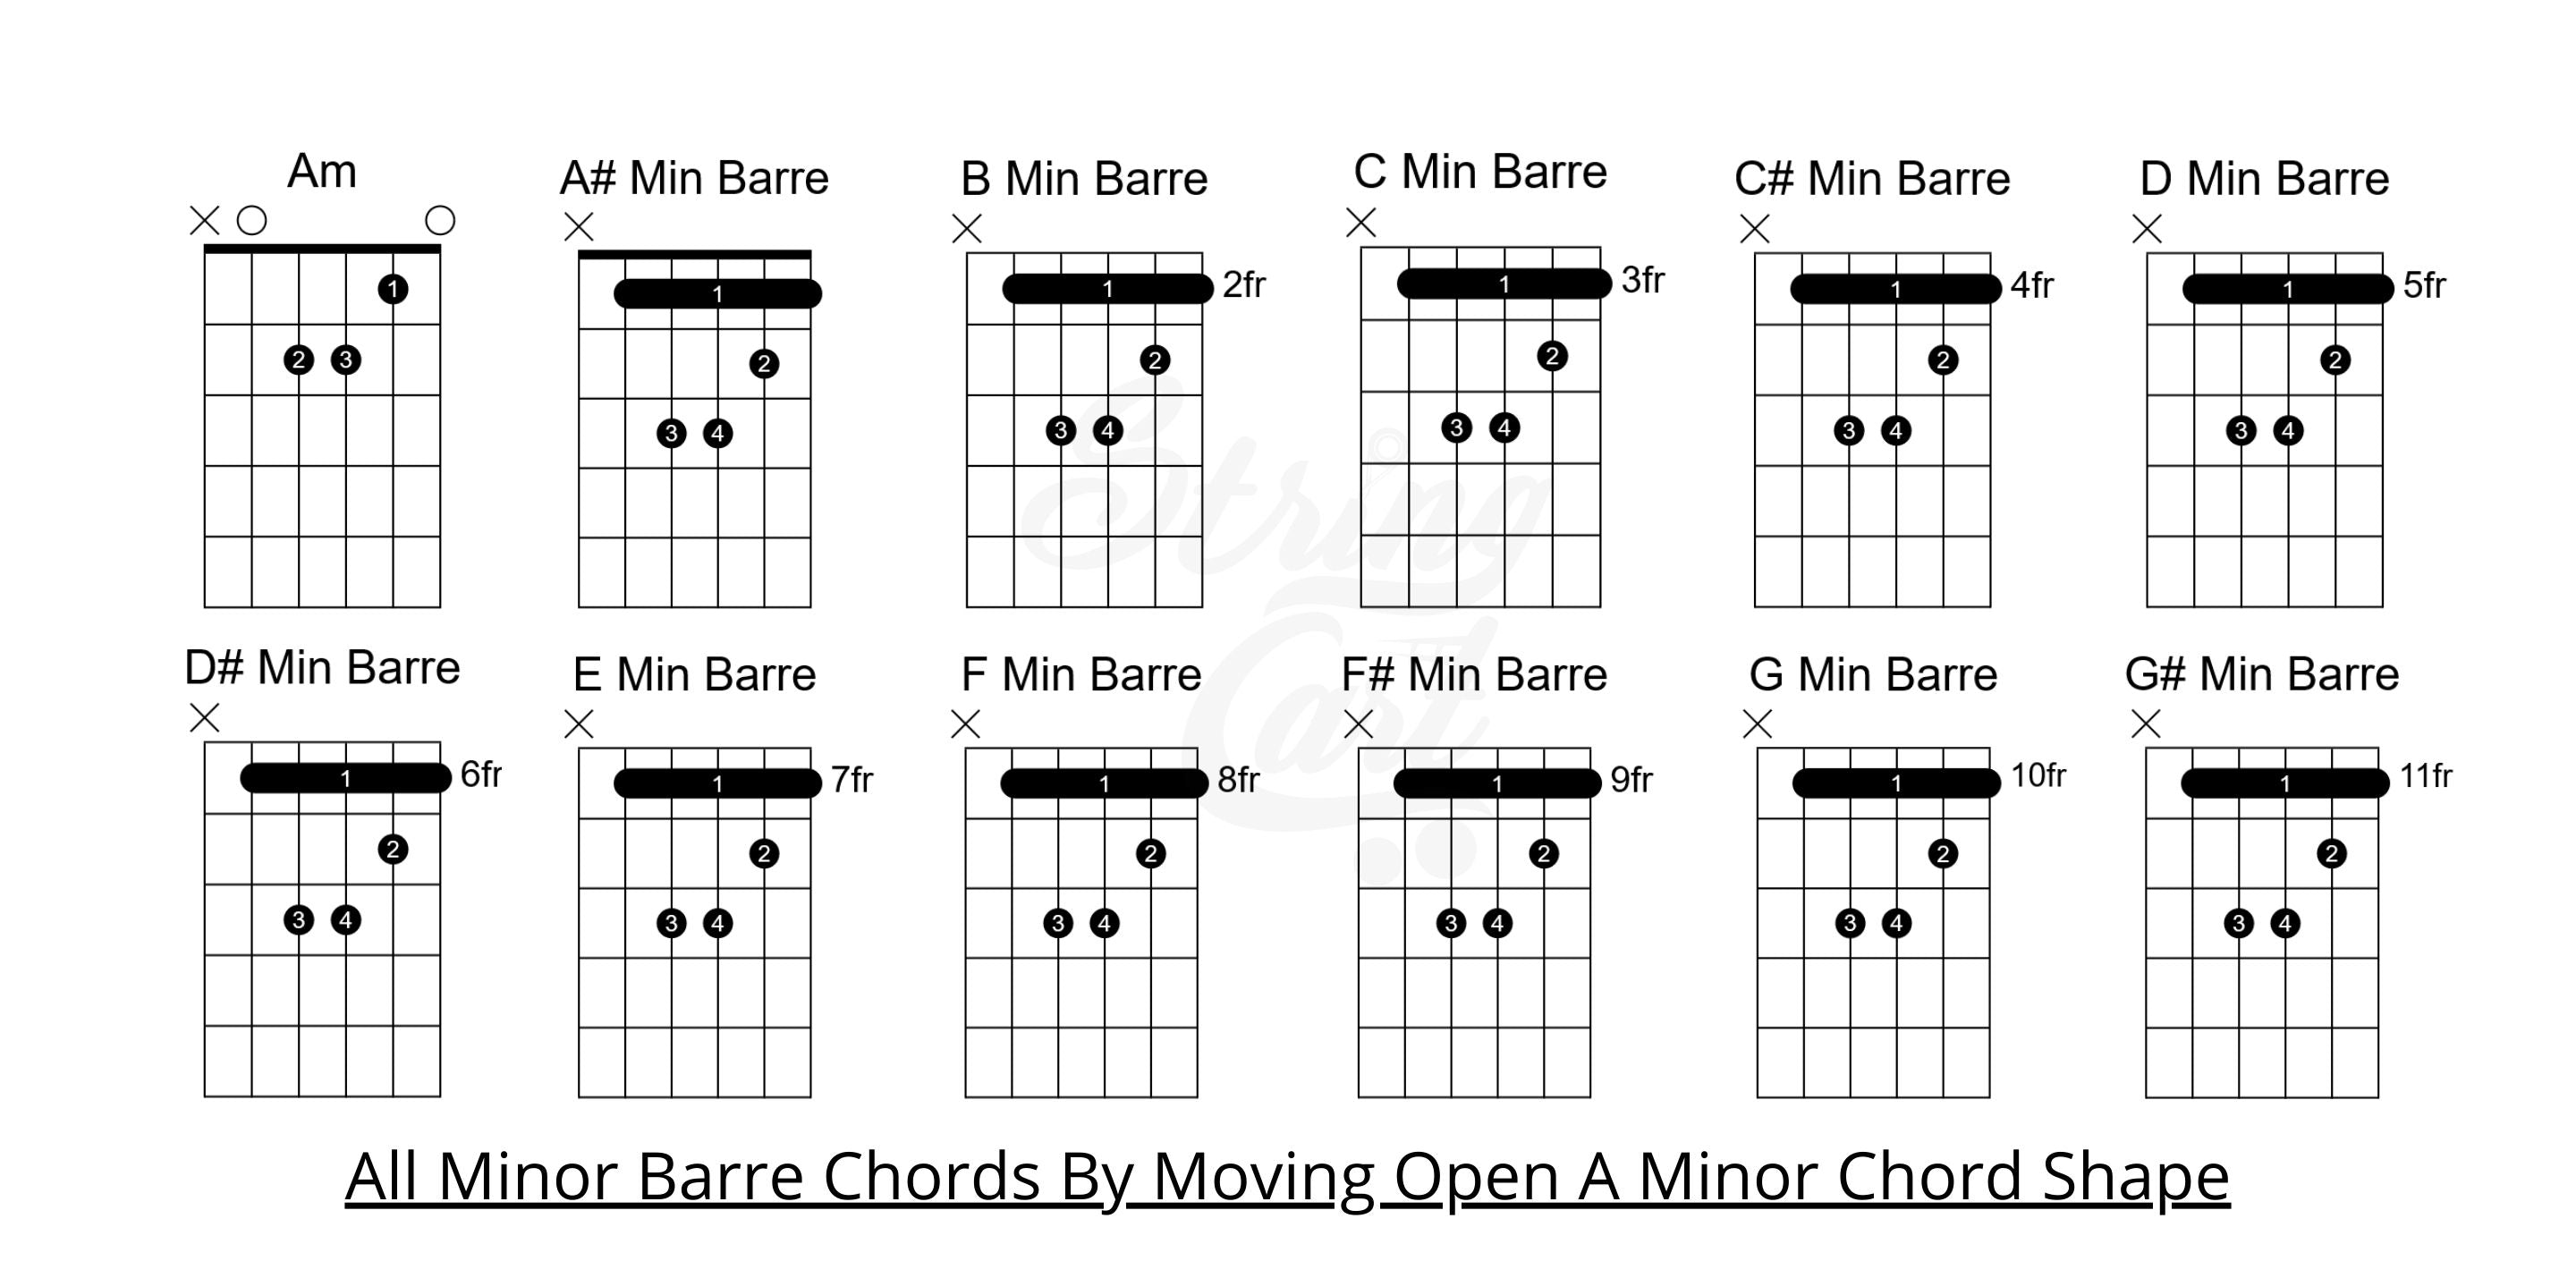 All Minor Barre Chords On Guitar Chart